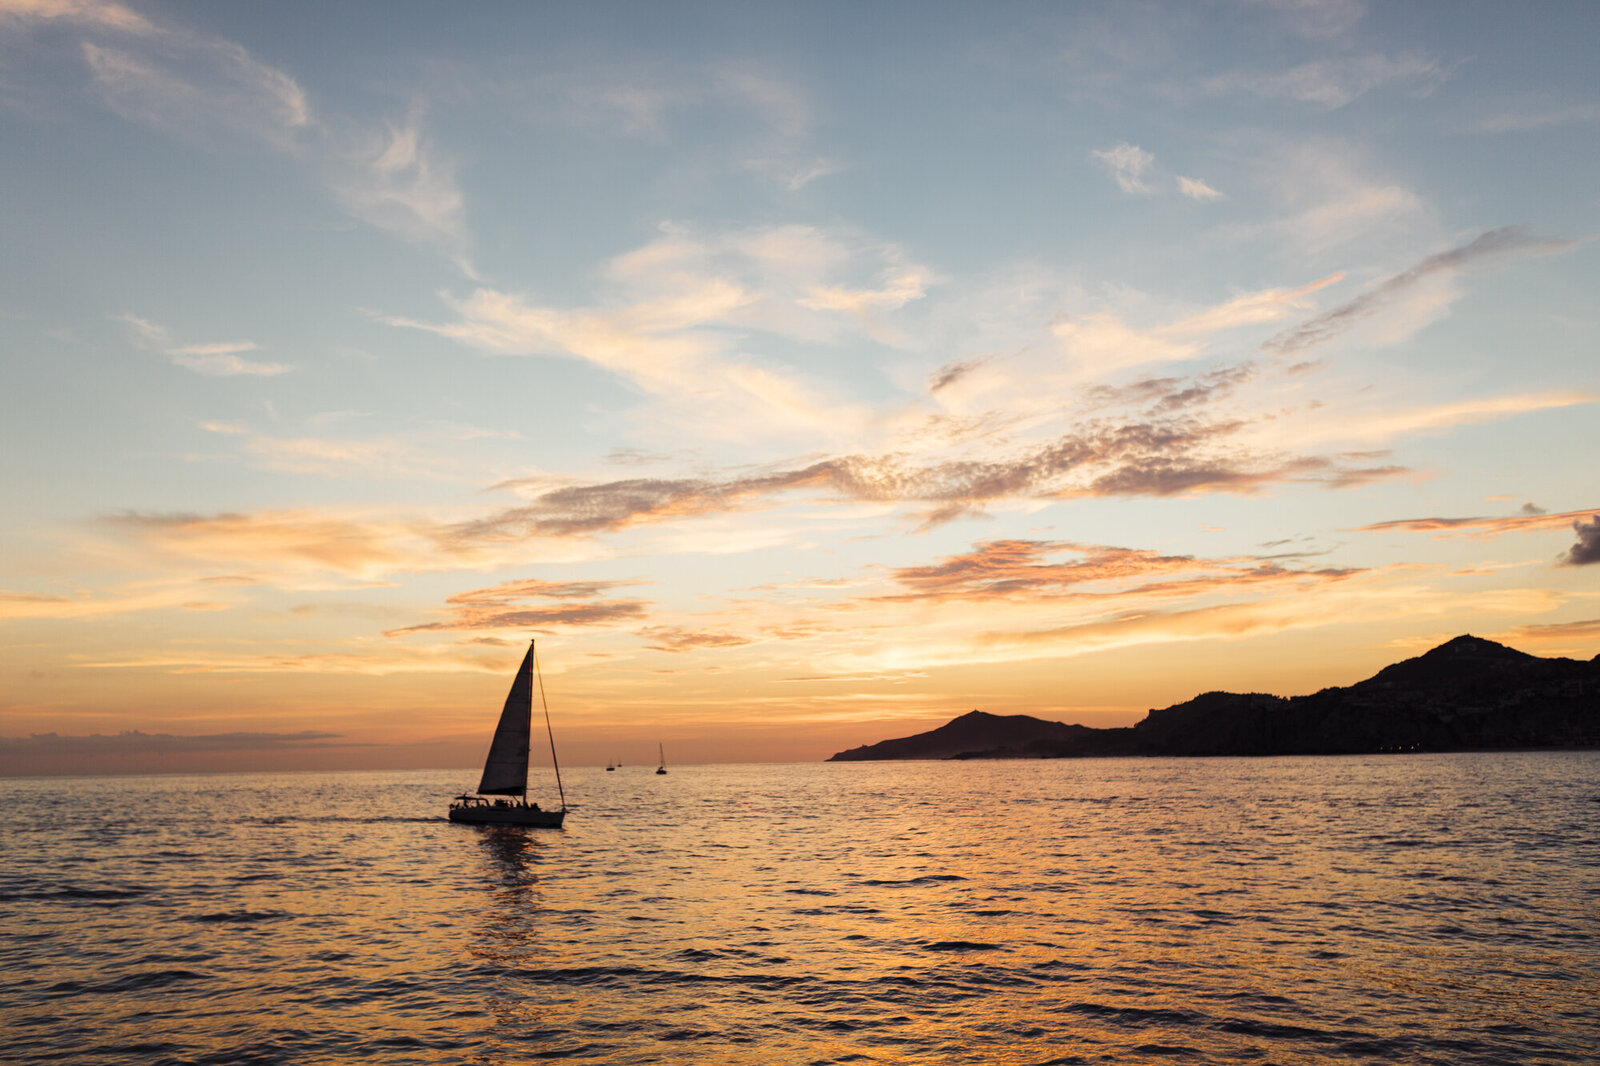 A sailboat cruising on calm waters at sunset with a colorful sky in the background, captured by a destination wedding photographer.